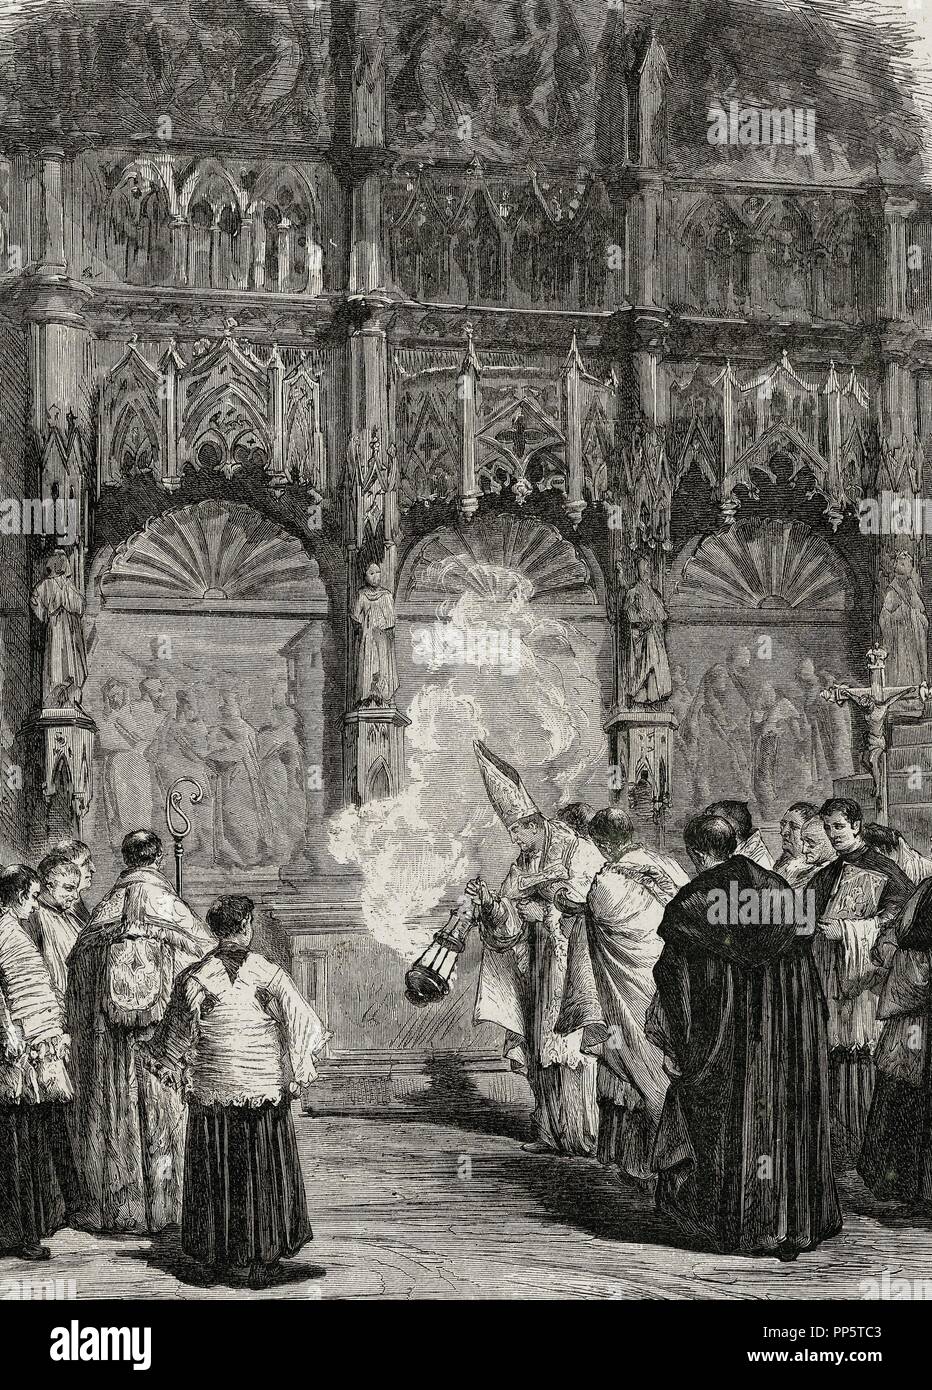 Spain. Zaragoza. Consecration of the Basilica of El Pilar. Engraving in The Spanish and American Illustration, 1872. Stock Photo